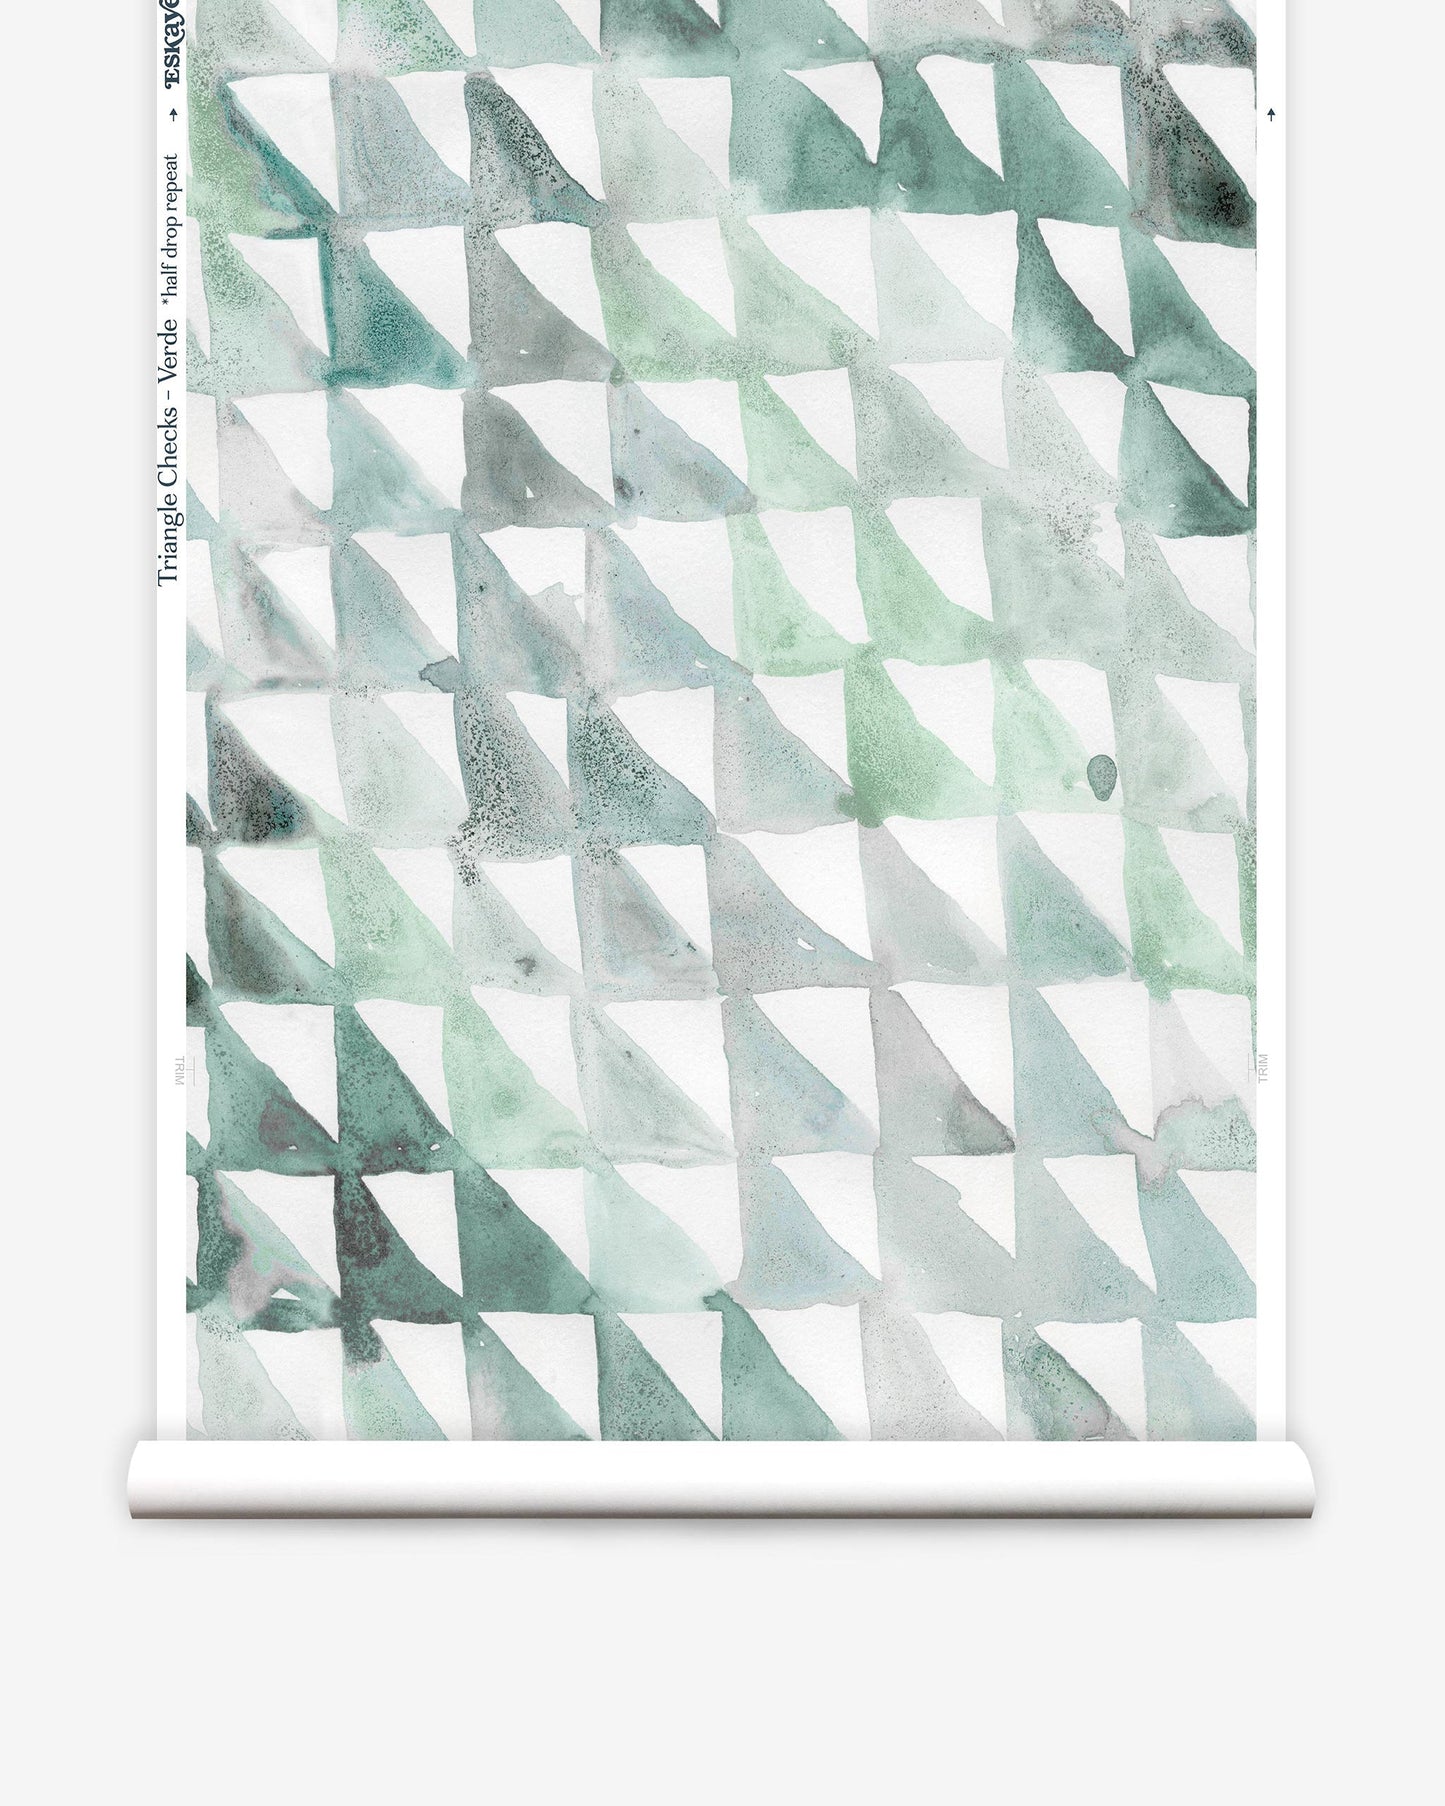 A roll of wallpaper with green and white triangles, Triangle Checks Wallwallpaper, Verde, on it